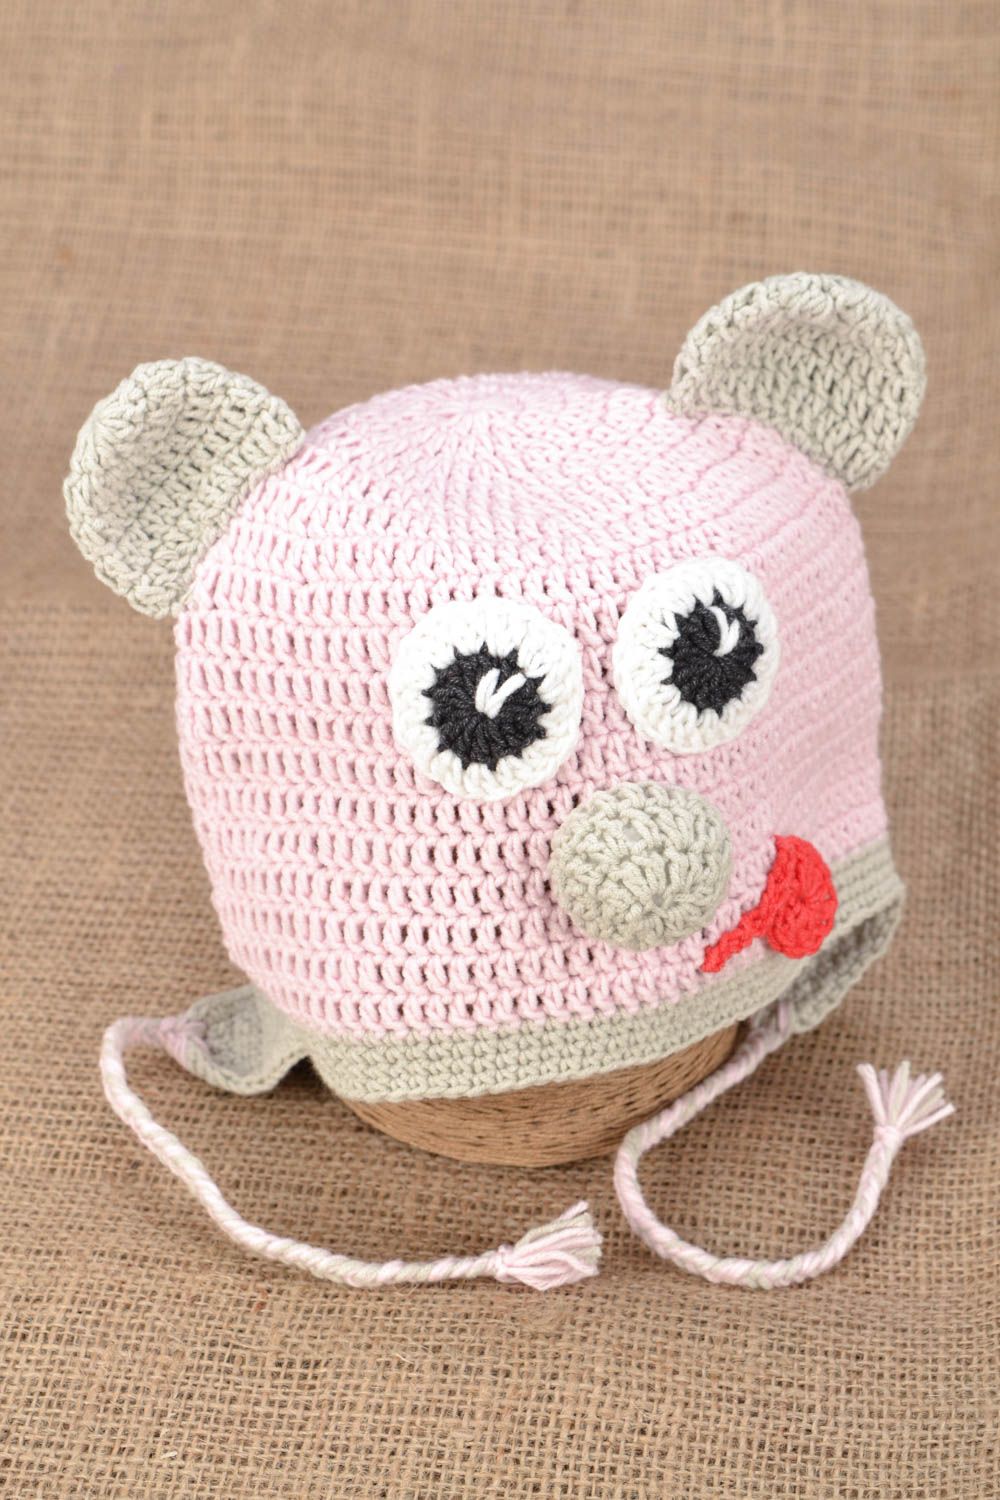 Hand crocheted pink hat photo 1